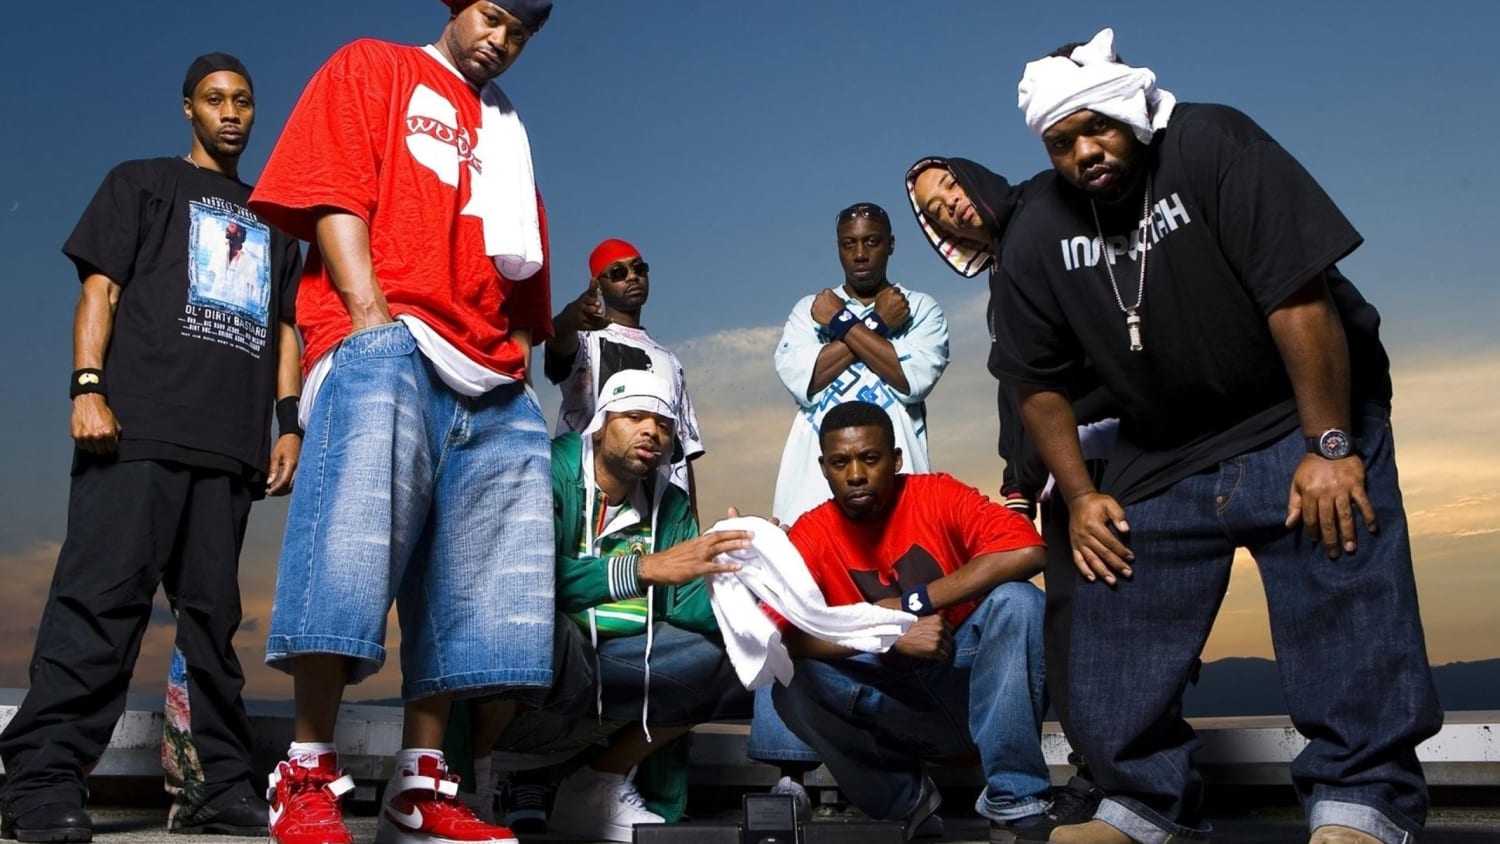 Wu-Tang Clan: Why they ain't ta f@#% wit, part 1